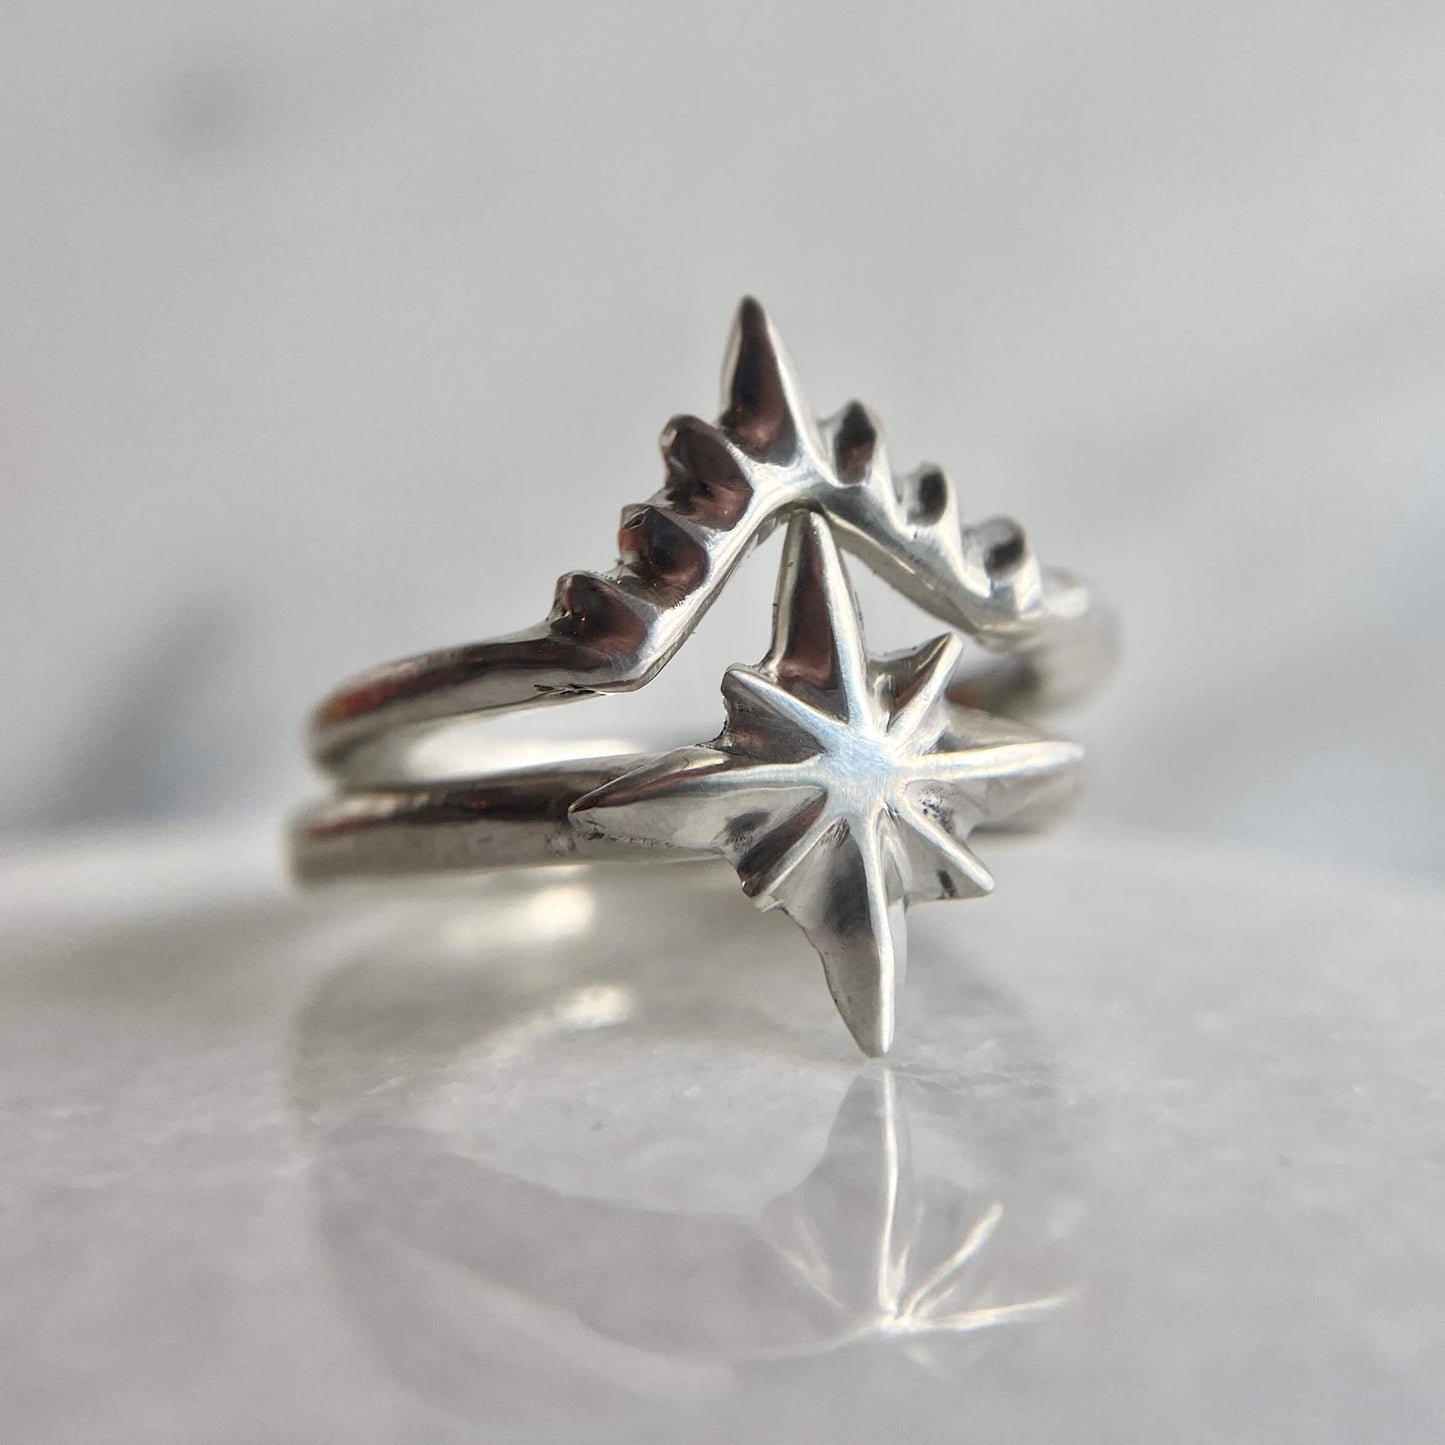 Celestial nesting star stacking ring set by Iron Oxide in sterling silver